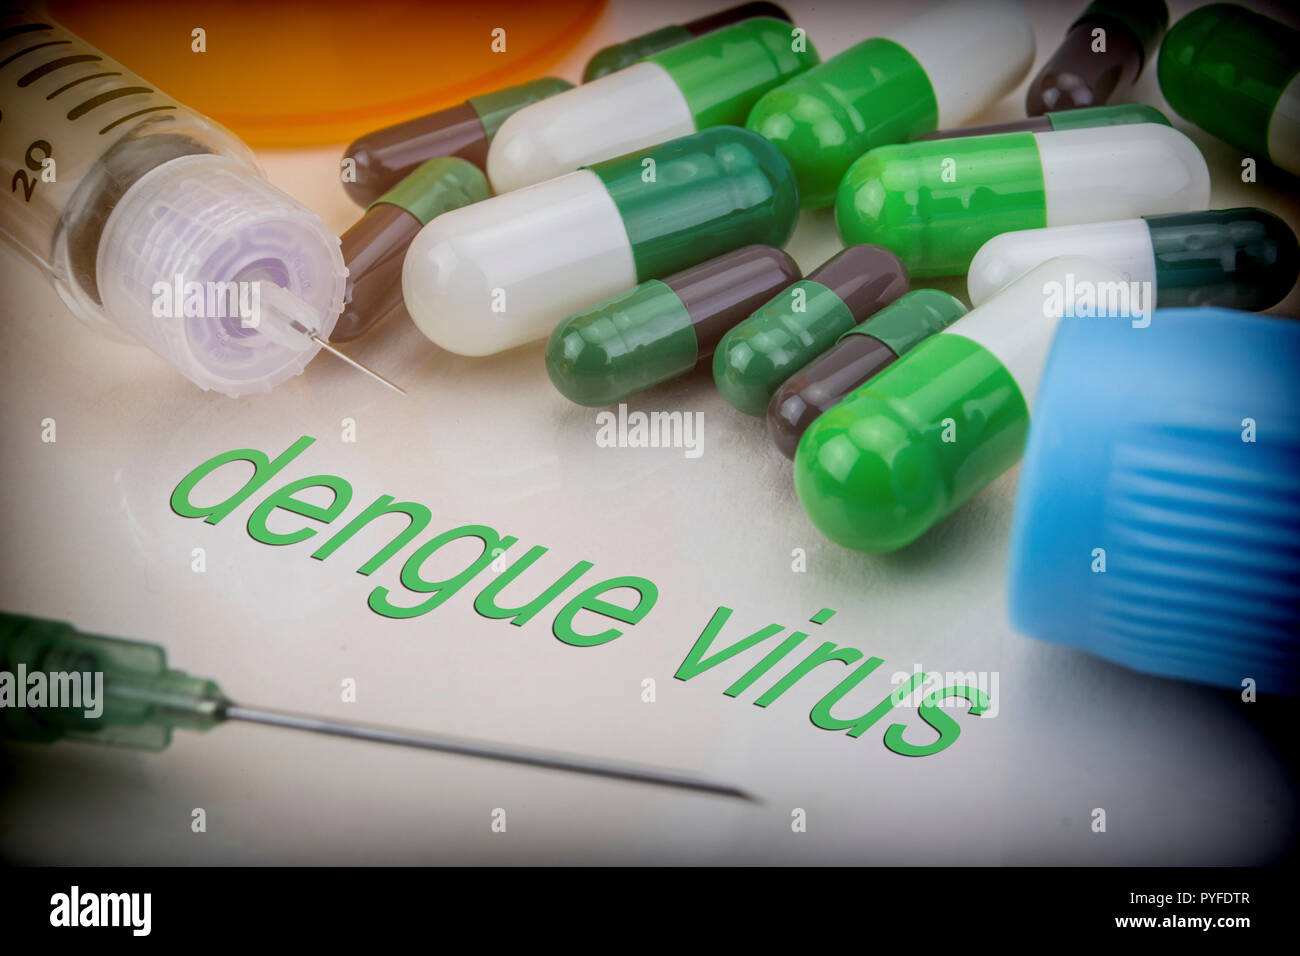 Dengue virus, medicines and syringes as concept of ordinary treatment health Stock Photo